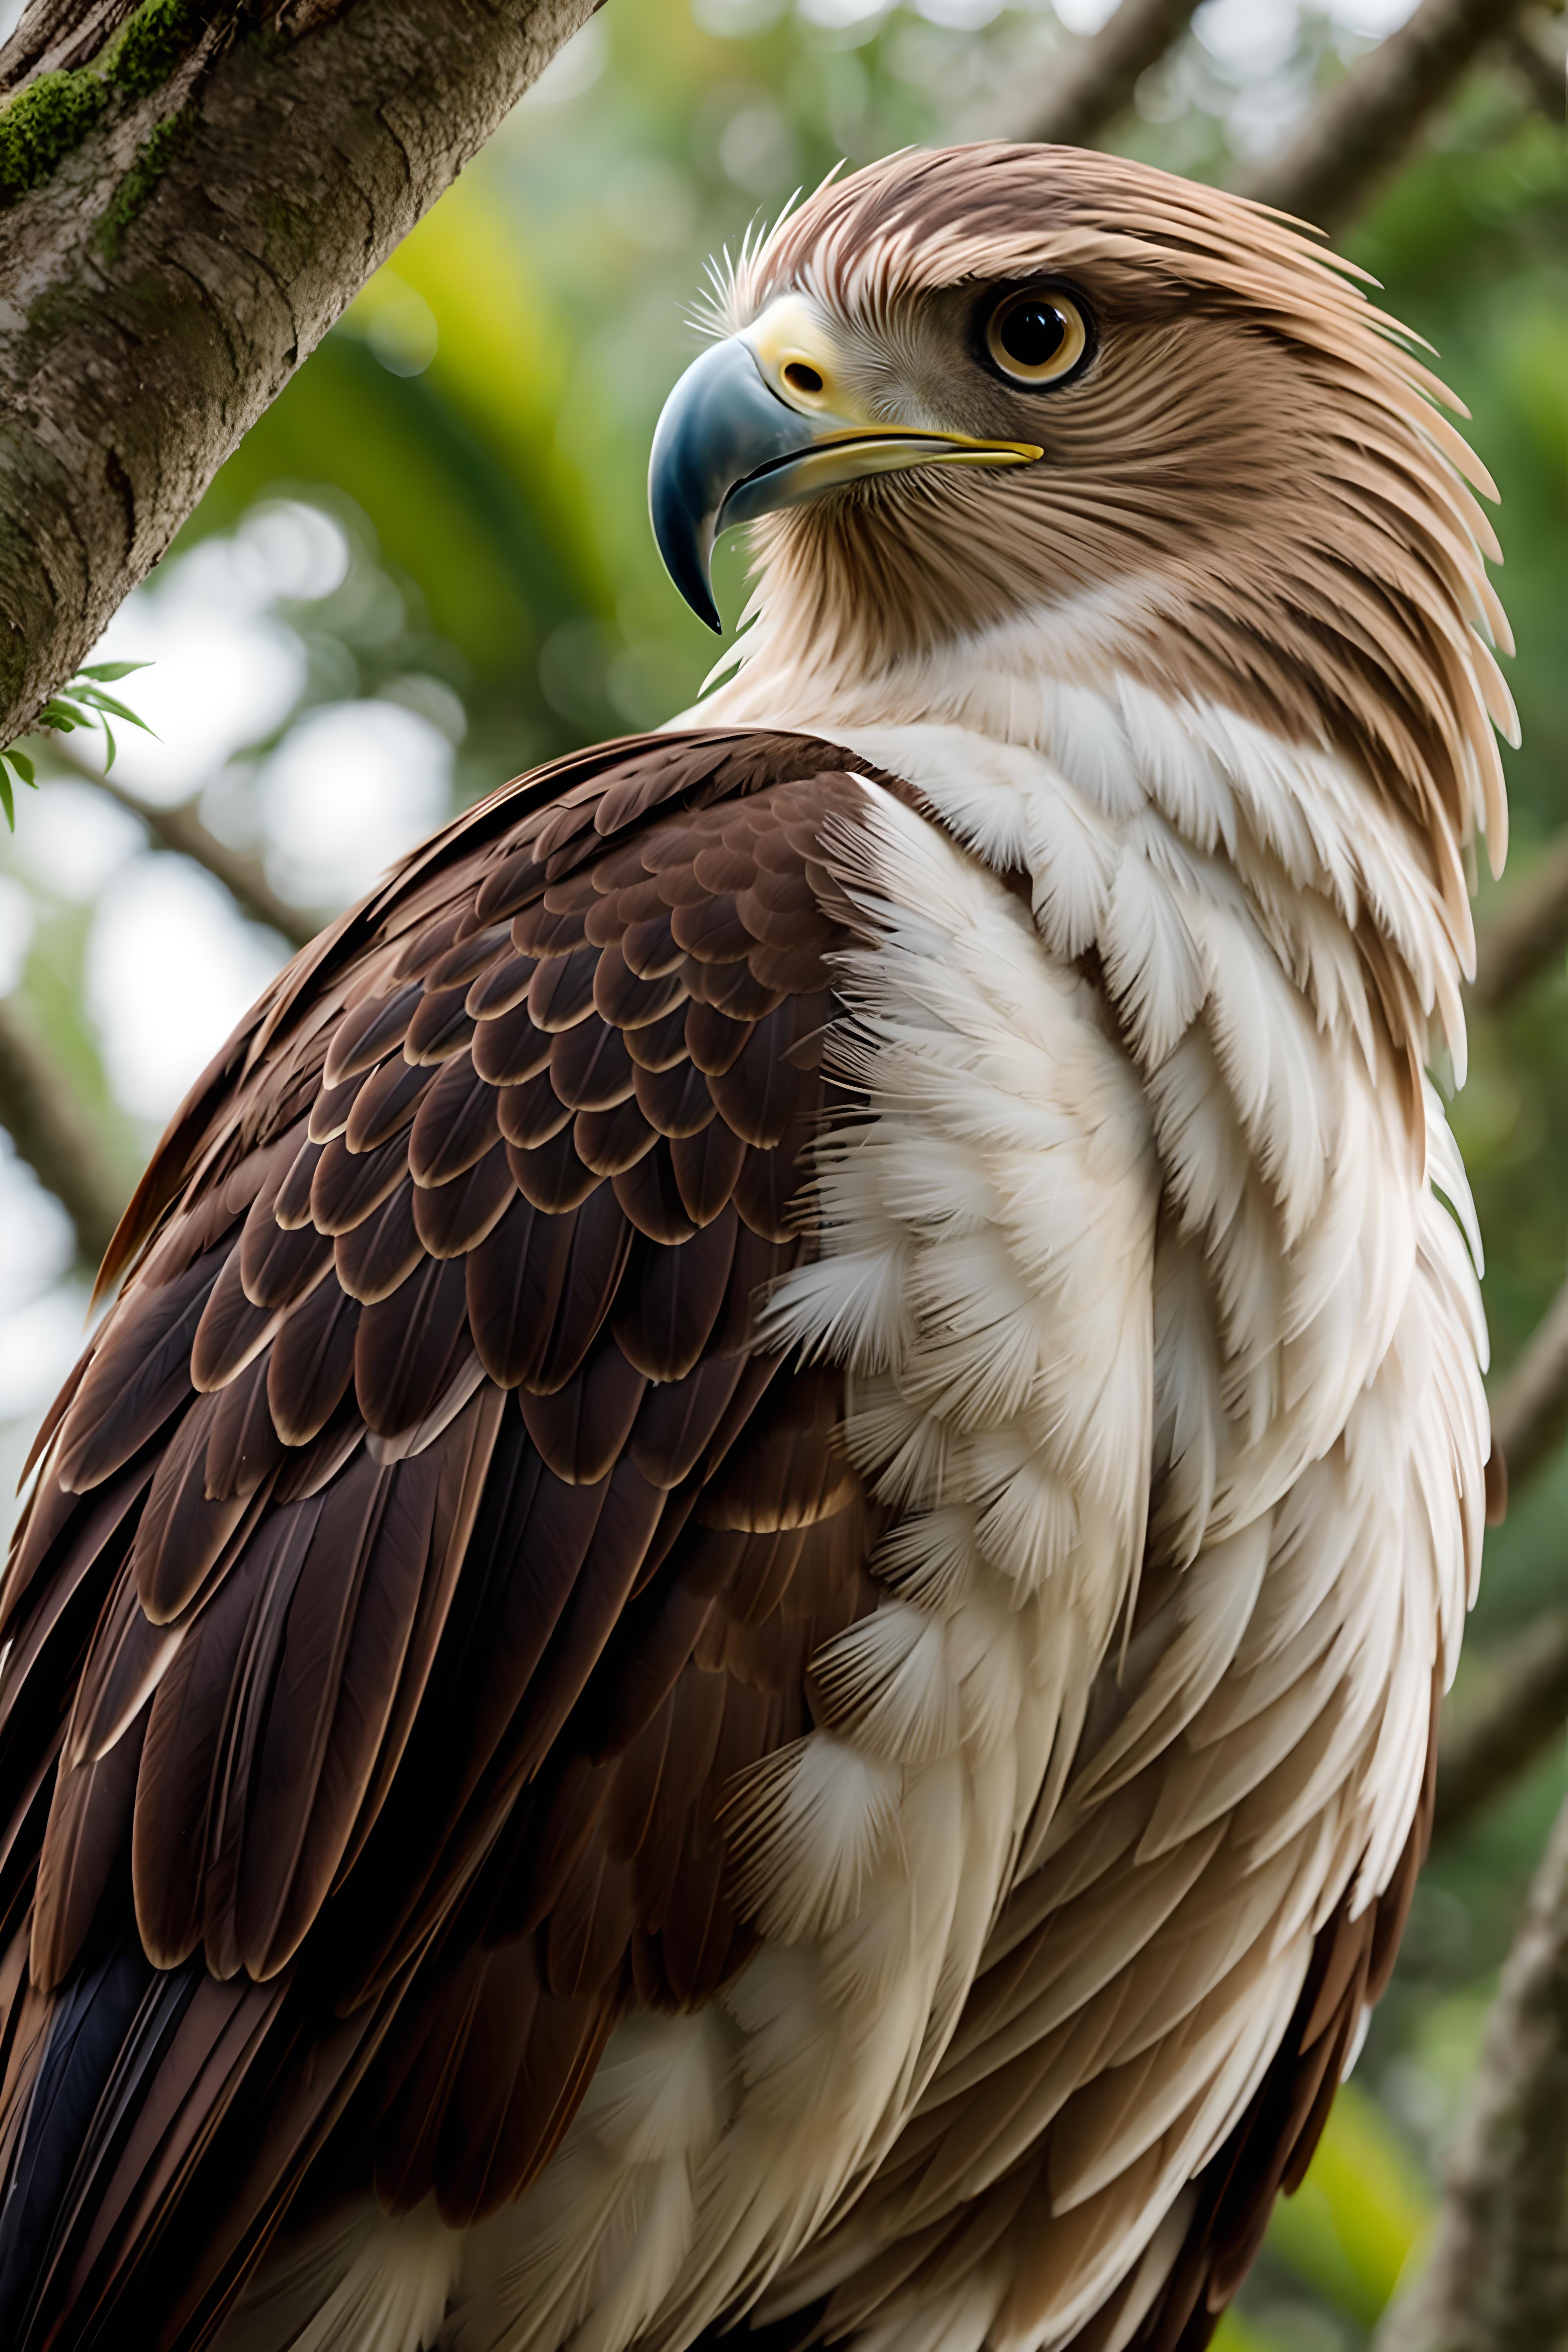 The Close-Up of a Brown and White Eagle's Wings